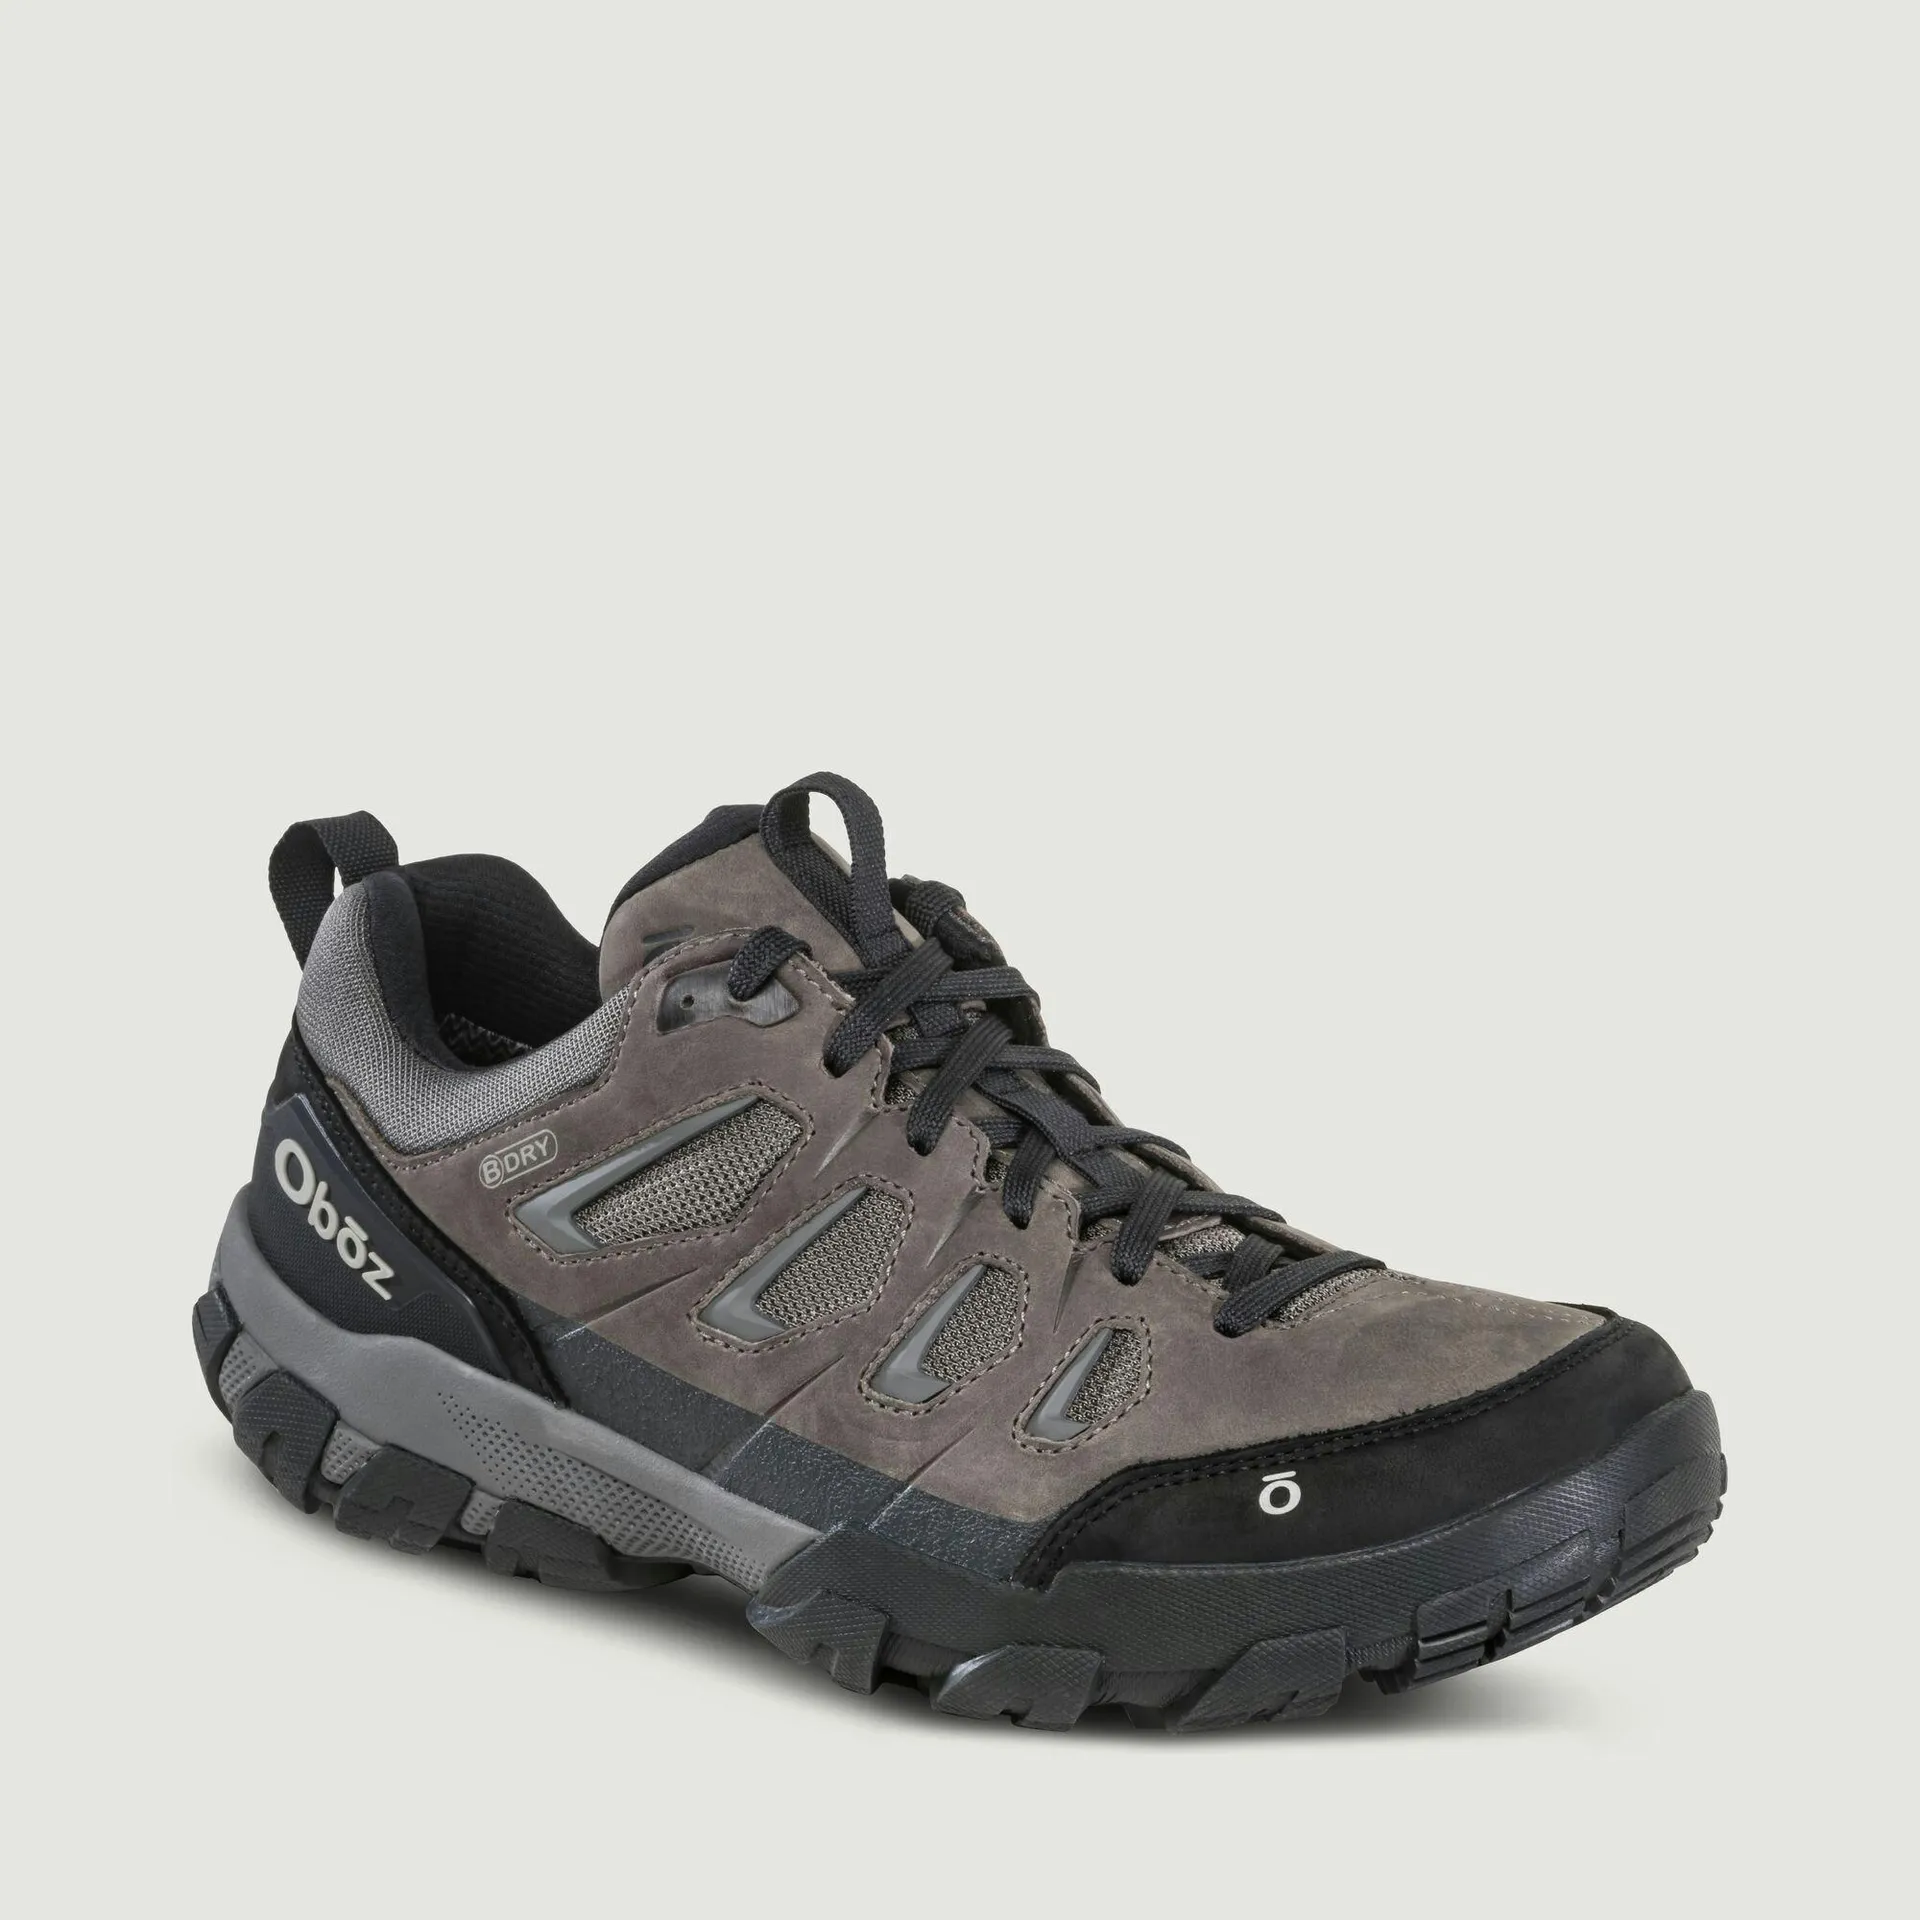 Oboz Sawtooth X Low BDRY Men’s Waterproof Hiking Shoes